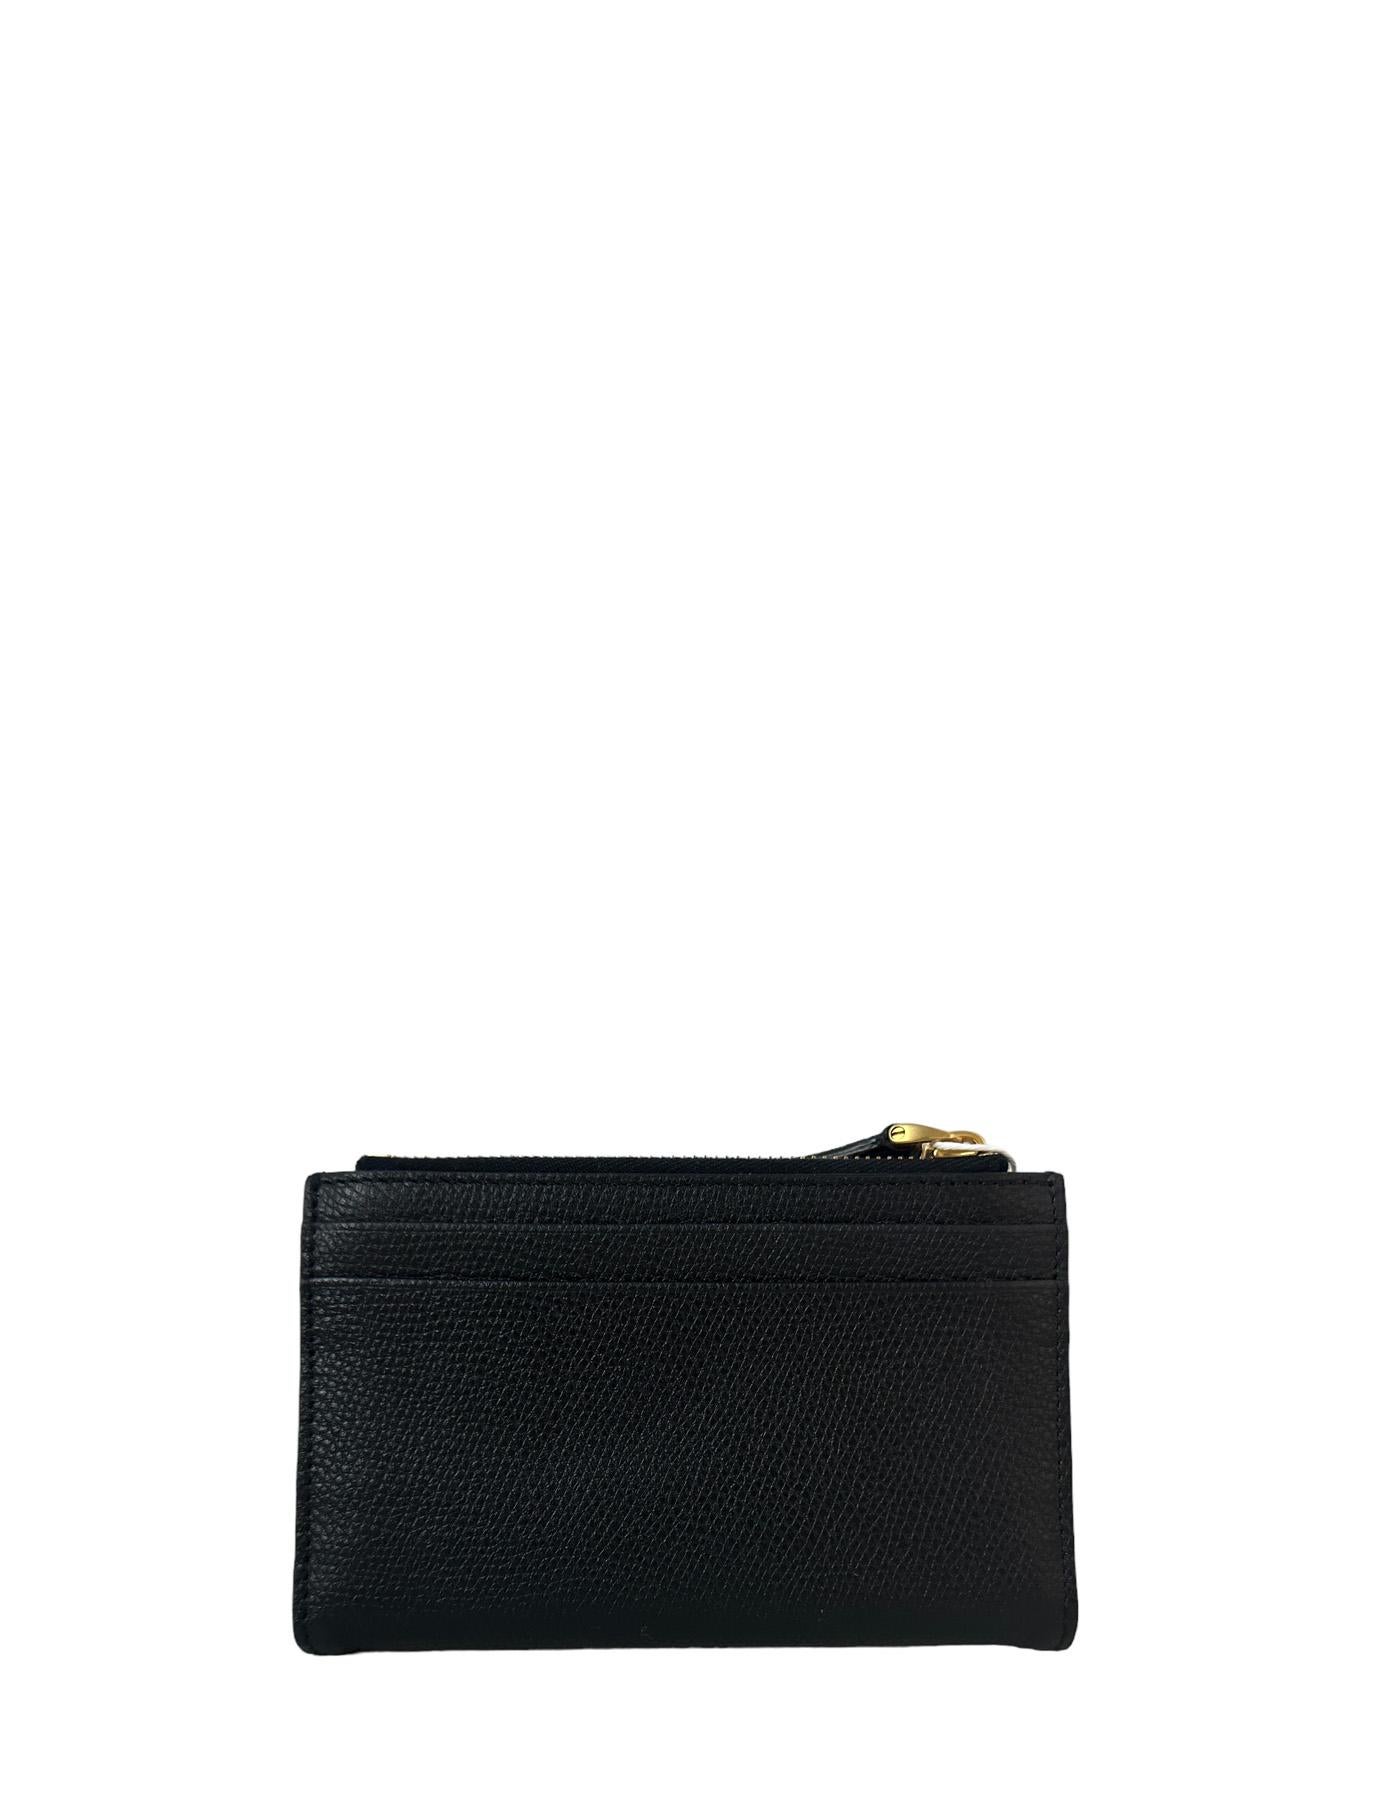 Valentino Vlogo Black Signature Grainy Calfskin Cardholder Wallet 

Made In: Italy
Color: Black
Hardware: Goldtone
Materials: Grainy calfskin leather
Lining: Leather
Closure/Opening: Snap button 
Exterior Pockets: Eight credit card slots, two back